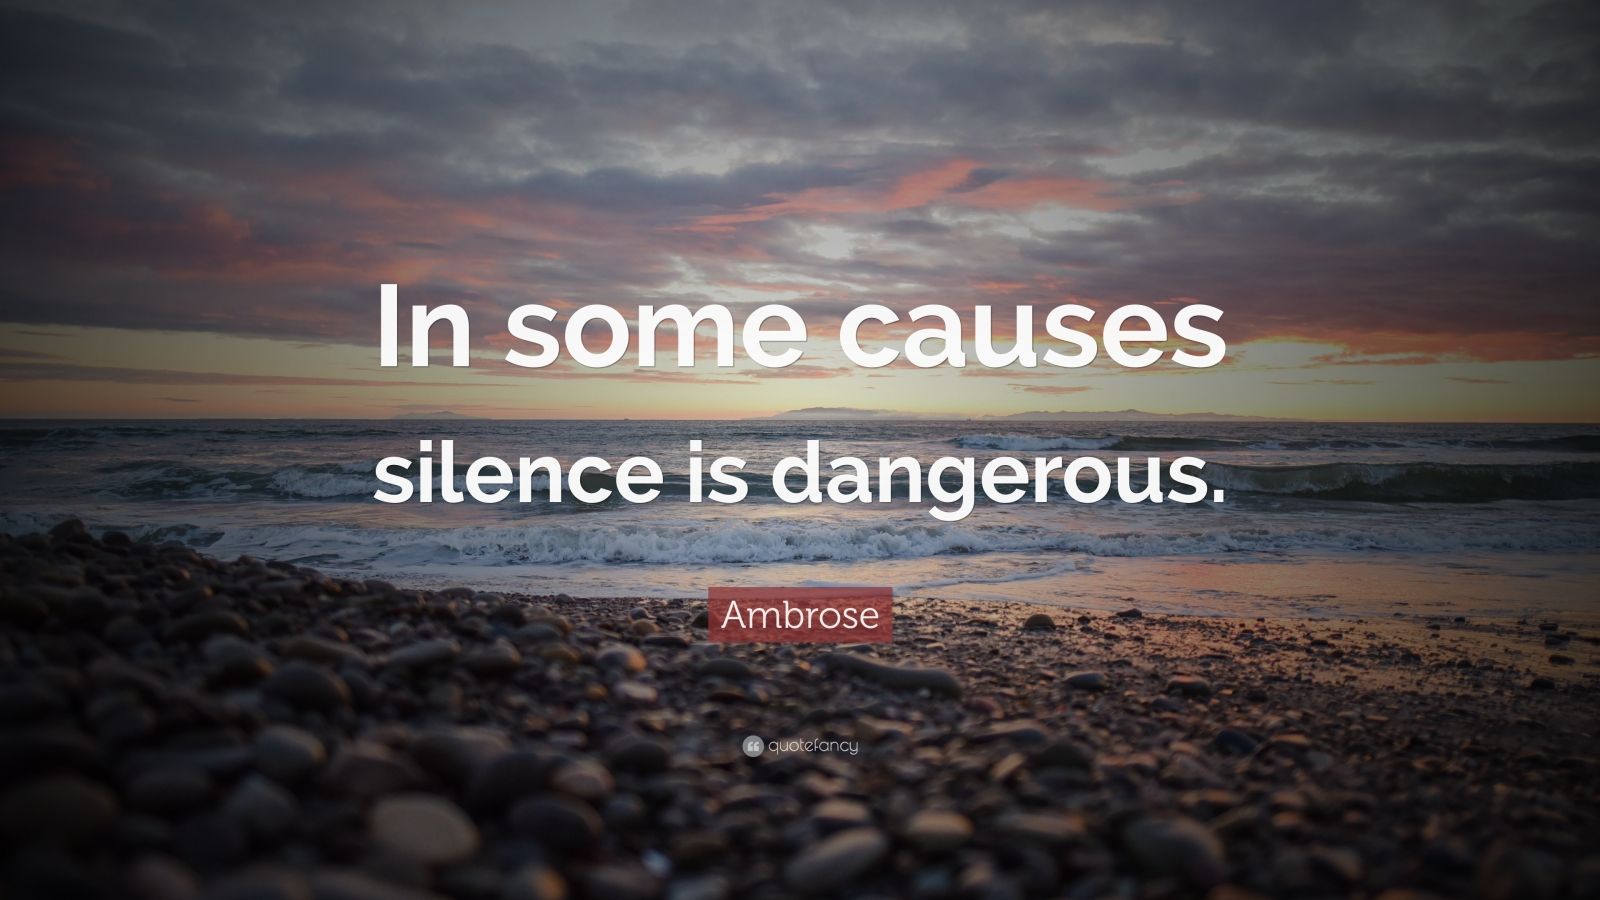 Ambrose Quote: “In some causes silence is dangerous.”